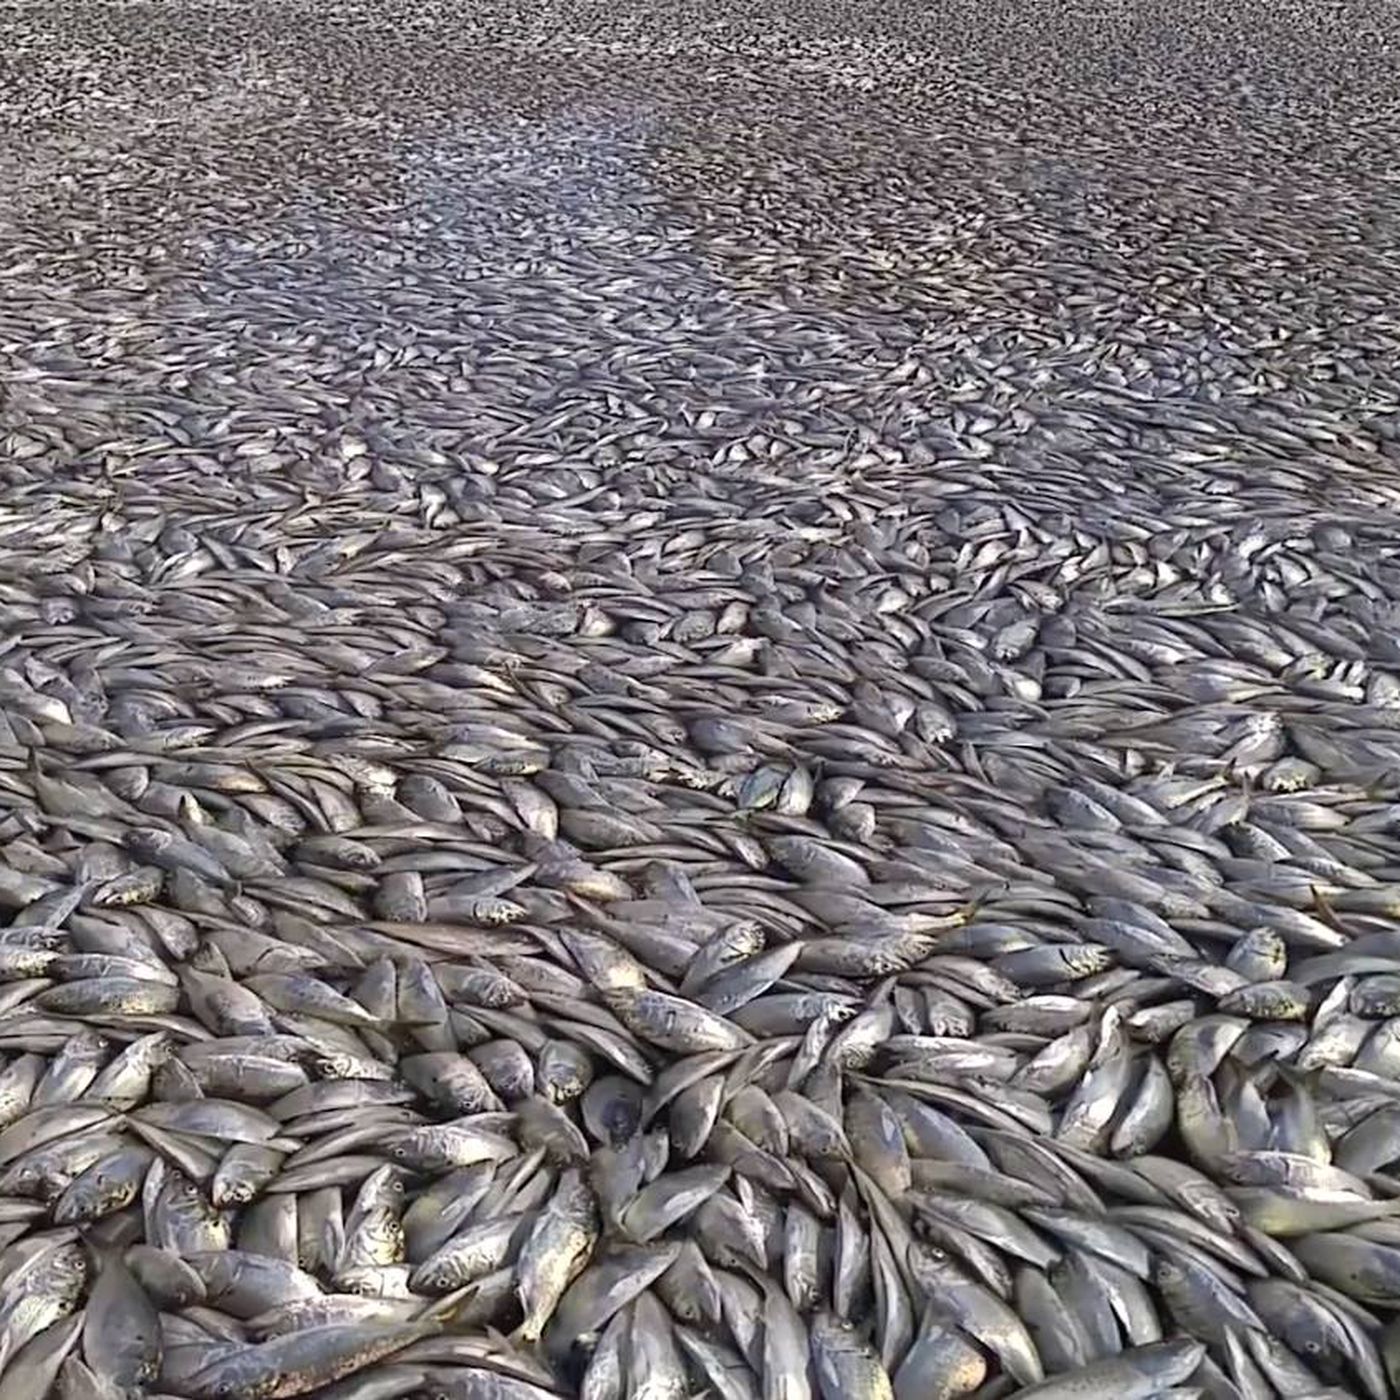 These videos of thousands of dead fish clogging a Long Island canal ...